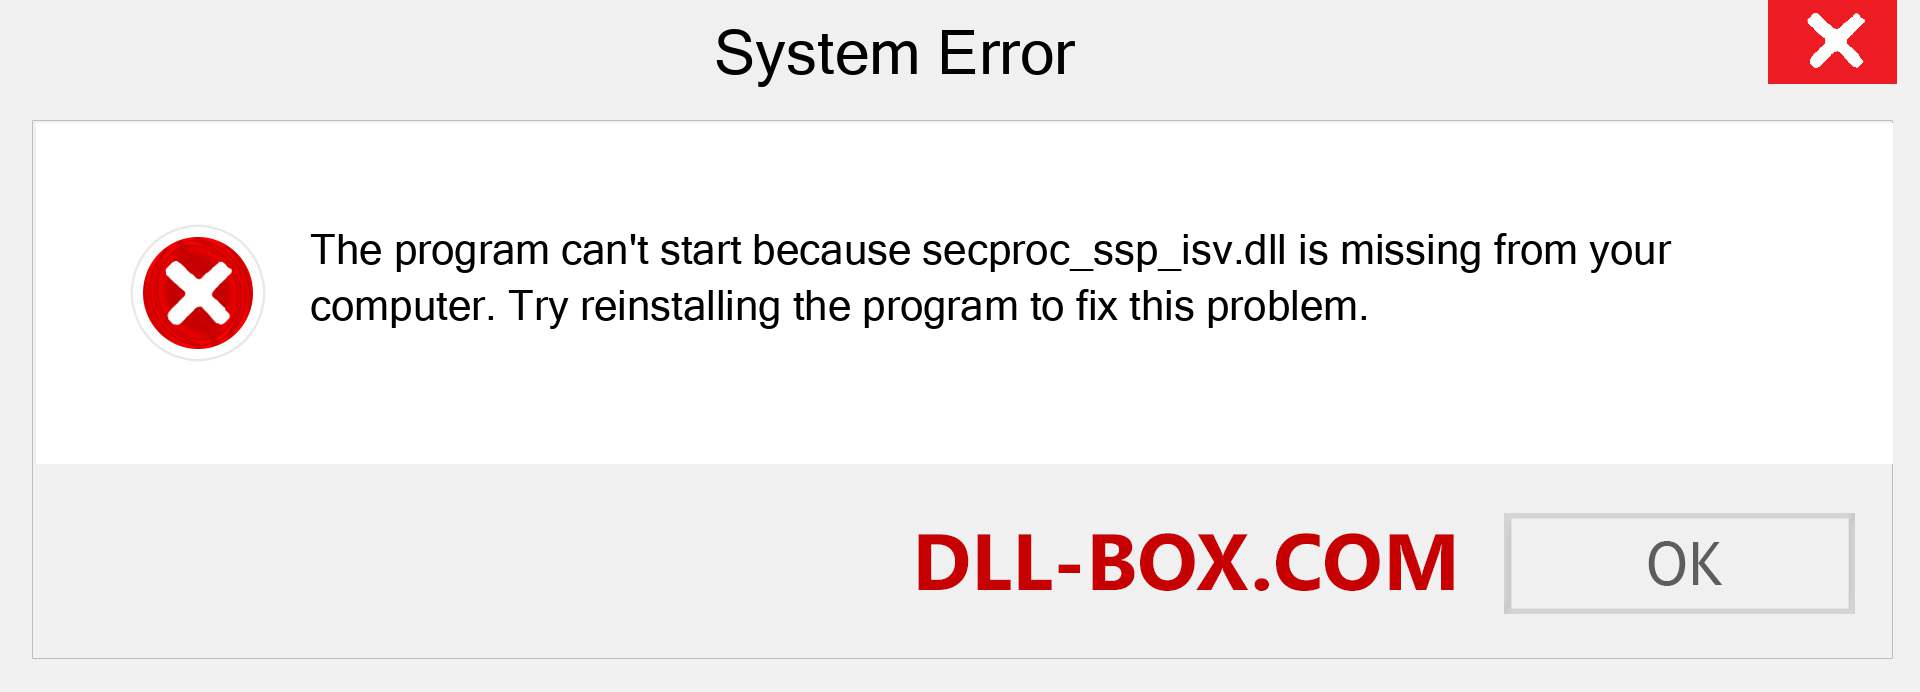  secproc_ssp_isv.dll file is missing?. Download for Windows 7, 8, 10 - Fix  secproc_ssp_isv dll Missing Error on Windows, photos, images